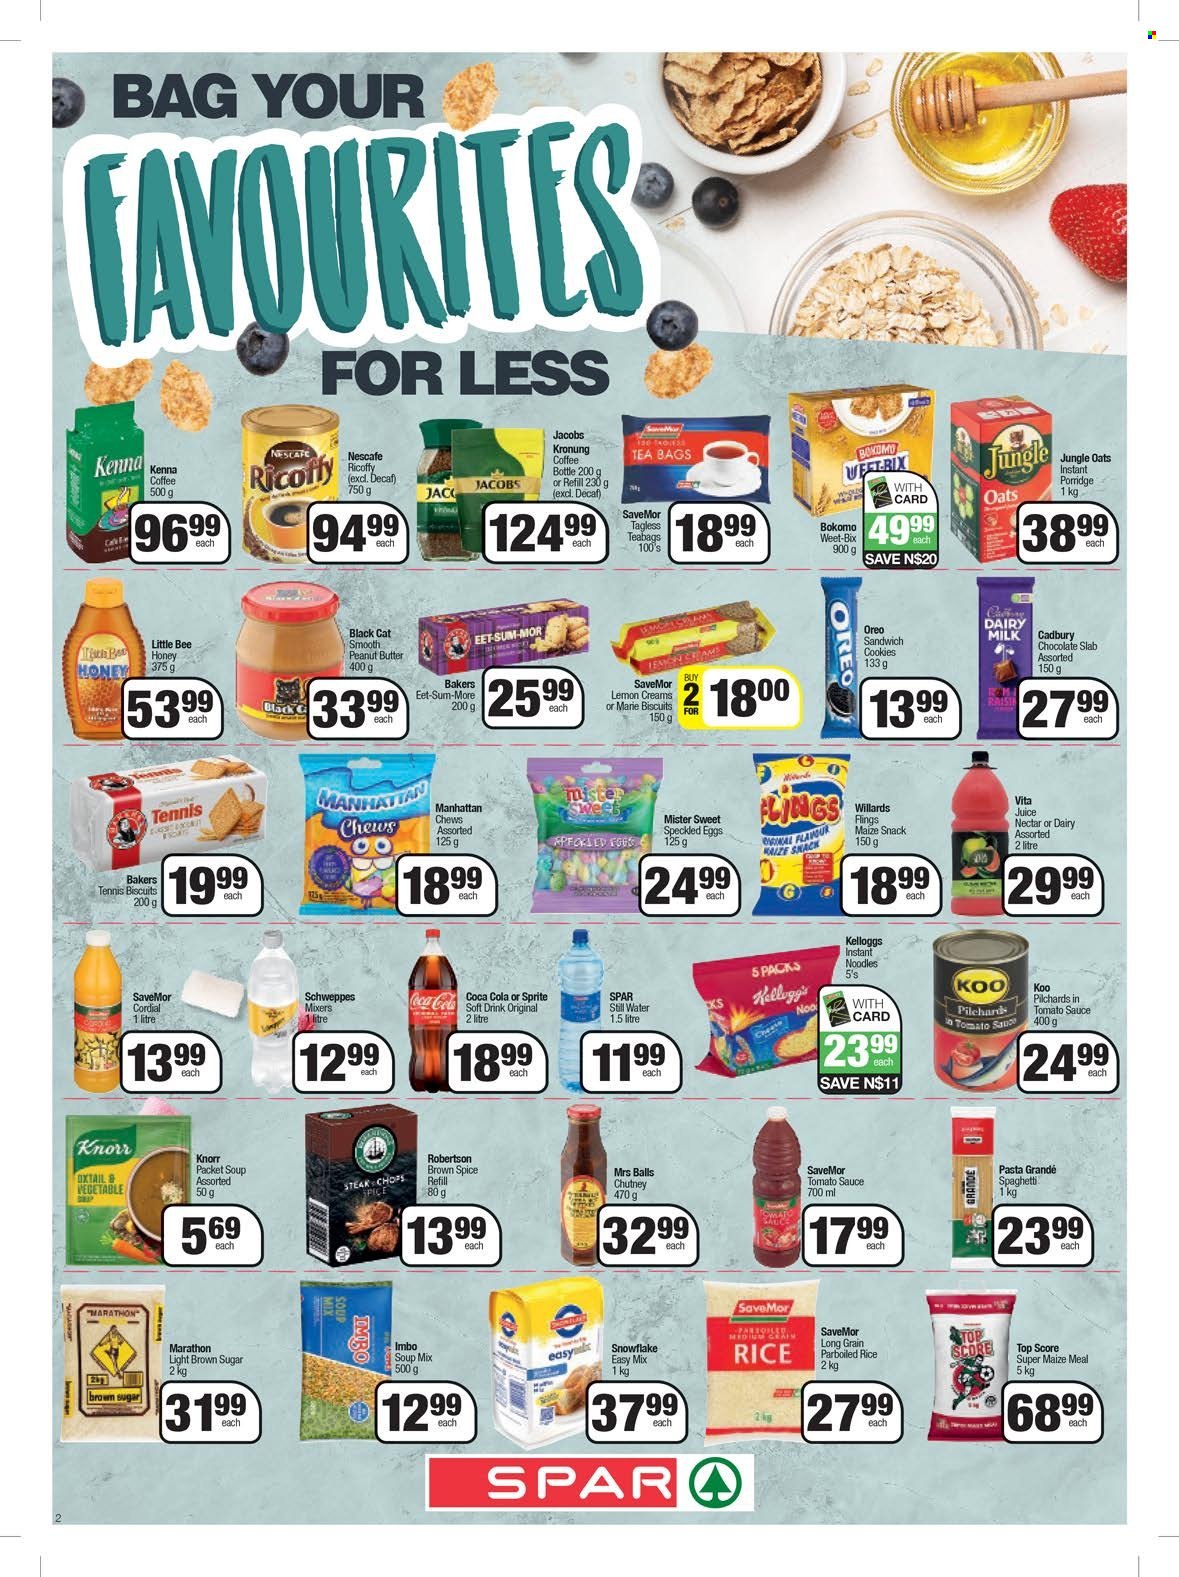 SPAR catalogue  - 20/06/2023 - 09/07/2023 - Sales products - snack, sardines, spaghetti, soup mix, soup, pasta, instant noodles, Knorr, noodles, cheese, Oreo, eggs, sandwich cookies, cookies, chocolate, cereal bar, chewing gum, Kellogg's, biscuit, Cadbury, Dairy Milk, maize snack, cane sugar, oats, maize meal, Koo, Weet-Bix, porridge, instant porridge, jungle oats, rice, parboiled rice, Pasta Grandé, spice, chutney, honey, Coca-Cola, Schweppes, Sprite, juice, soft drink, water, tea bags, coffee, Jacobs, Ricoffy, Nescafé, Jacobs Krönung, beef meat, oxtail, steak. Page 2.